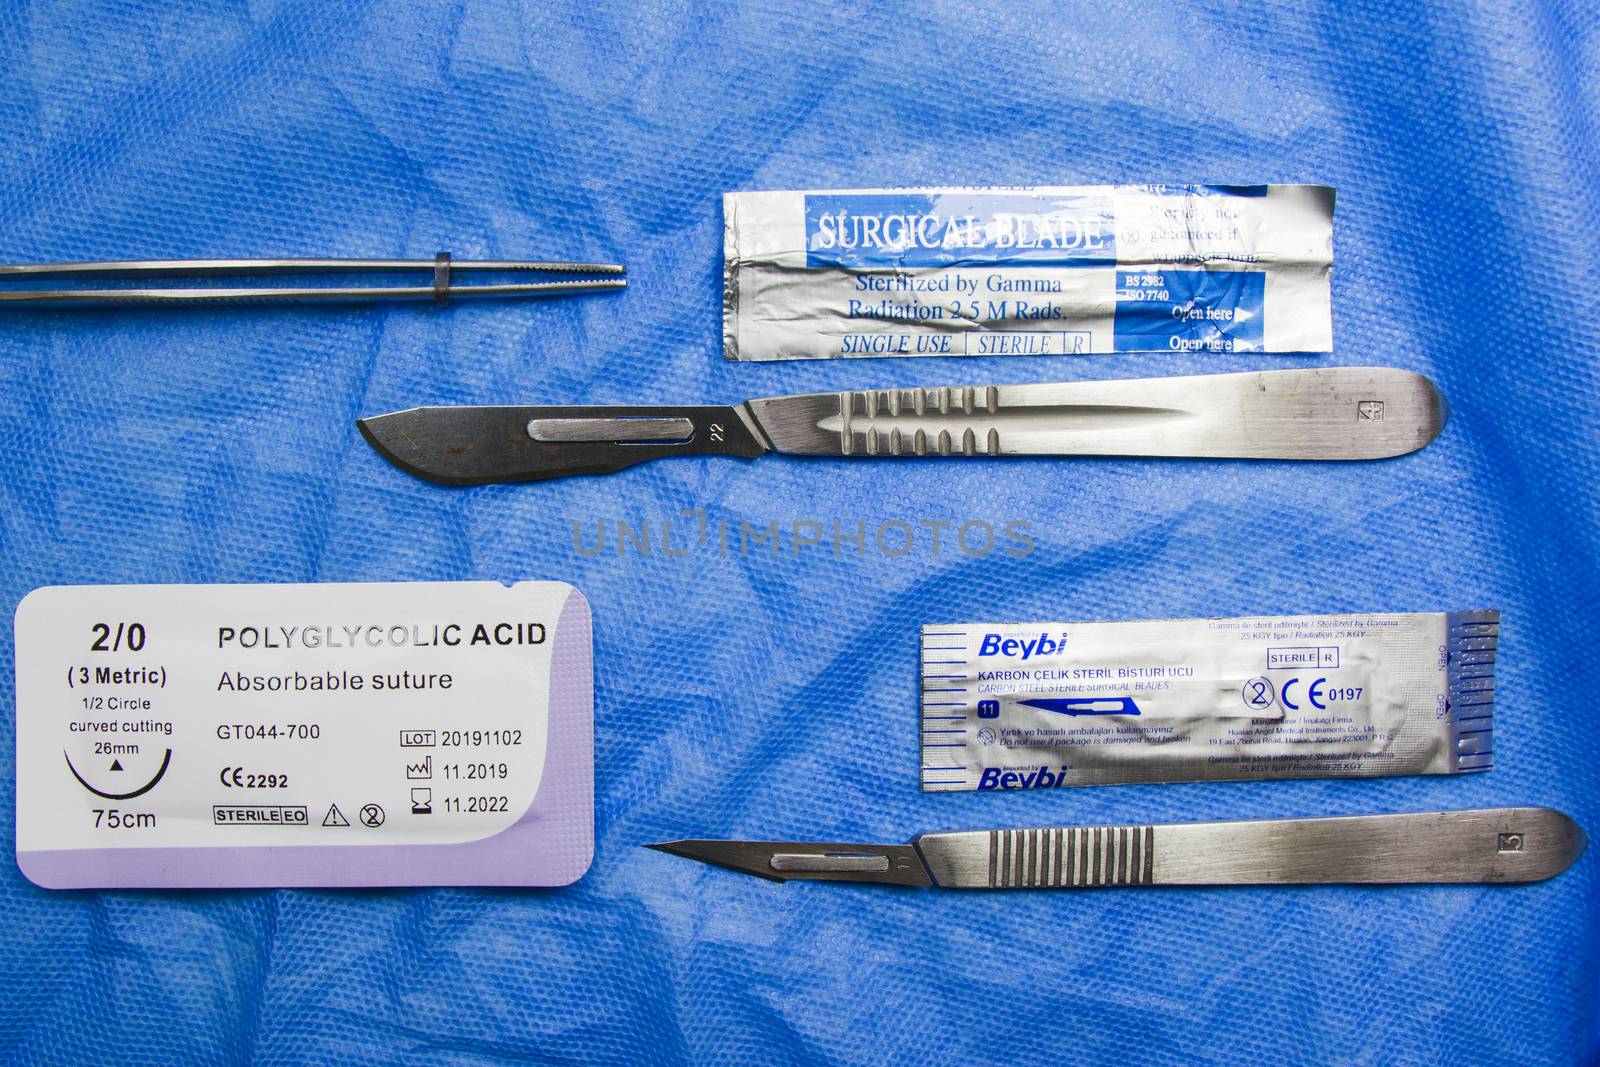 Tbilisi, Georgia - July 22, 2020: Dissection Kit - Premium Quality Stainless Steel Tools for Medical Students of Anatomy, Biology, Veterinary, Marine Biology with Scalpel Blades Included for Dissecting Frogs